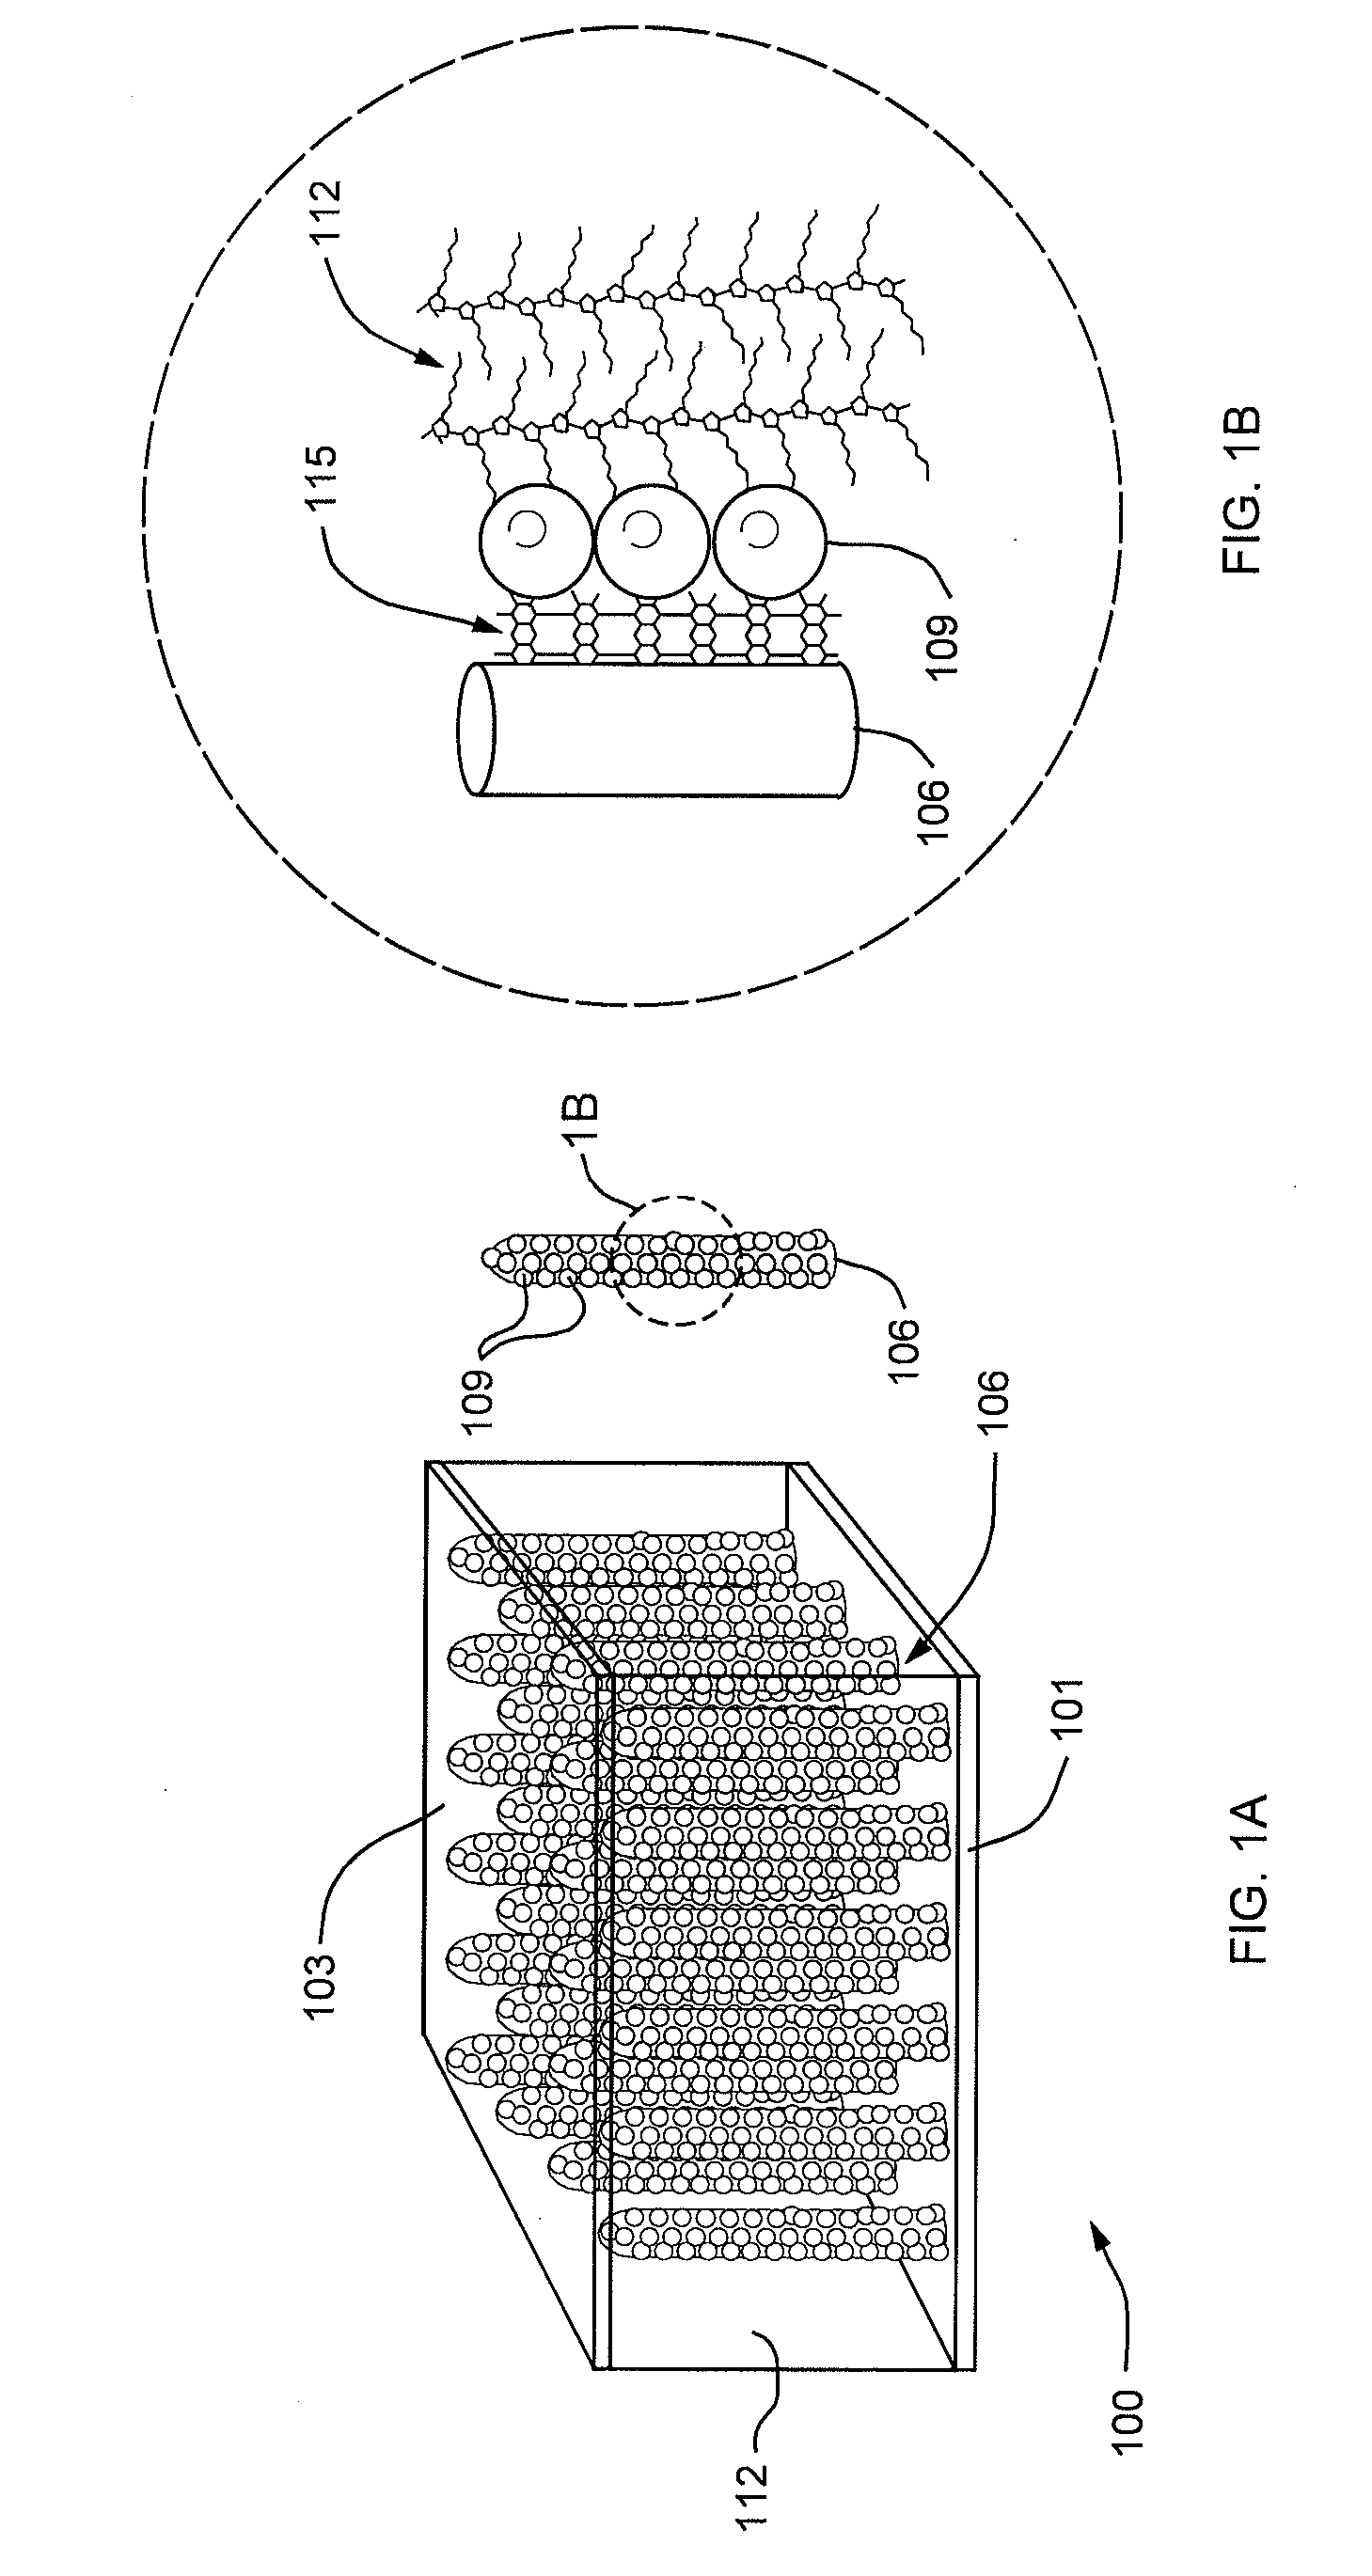 Hybrid photovoltaic cells and related methods